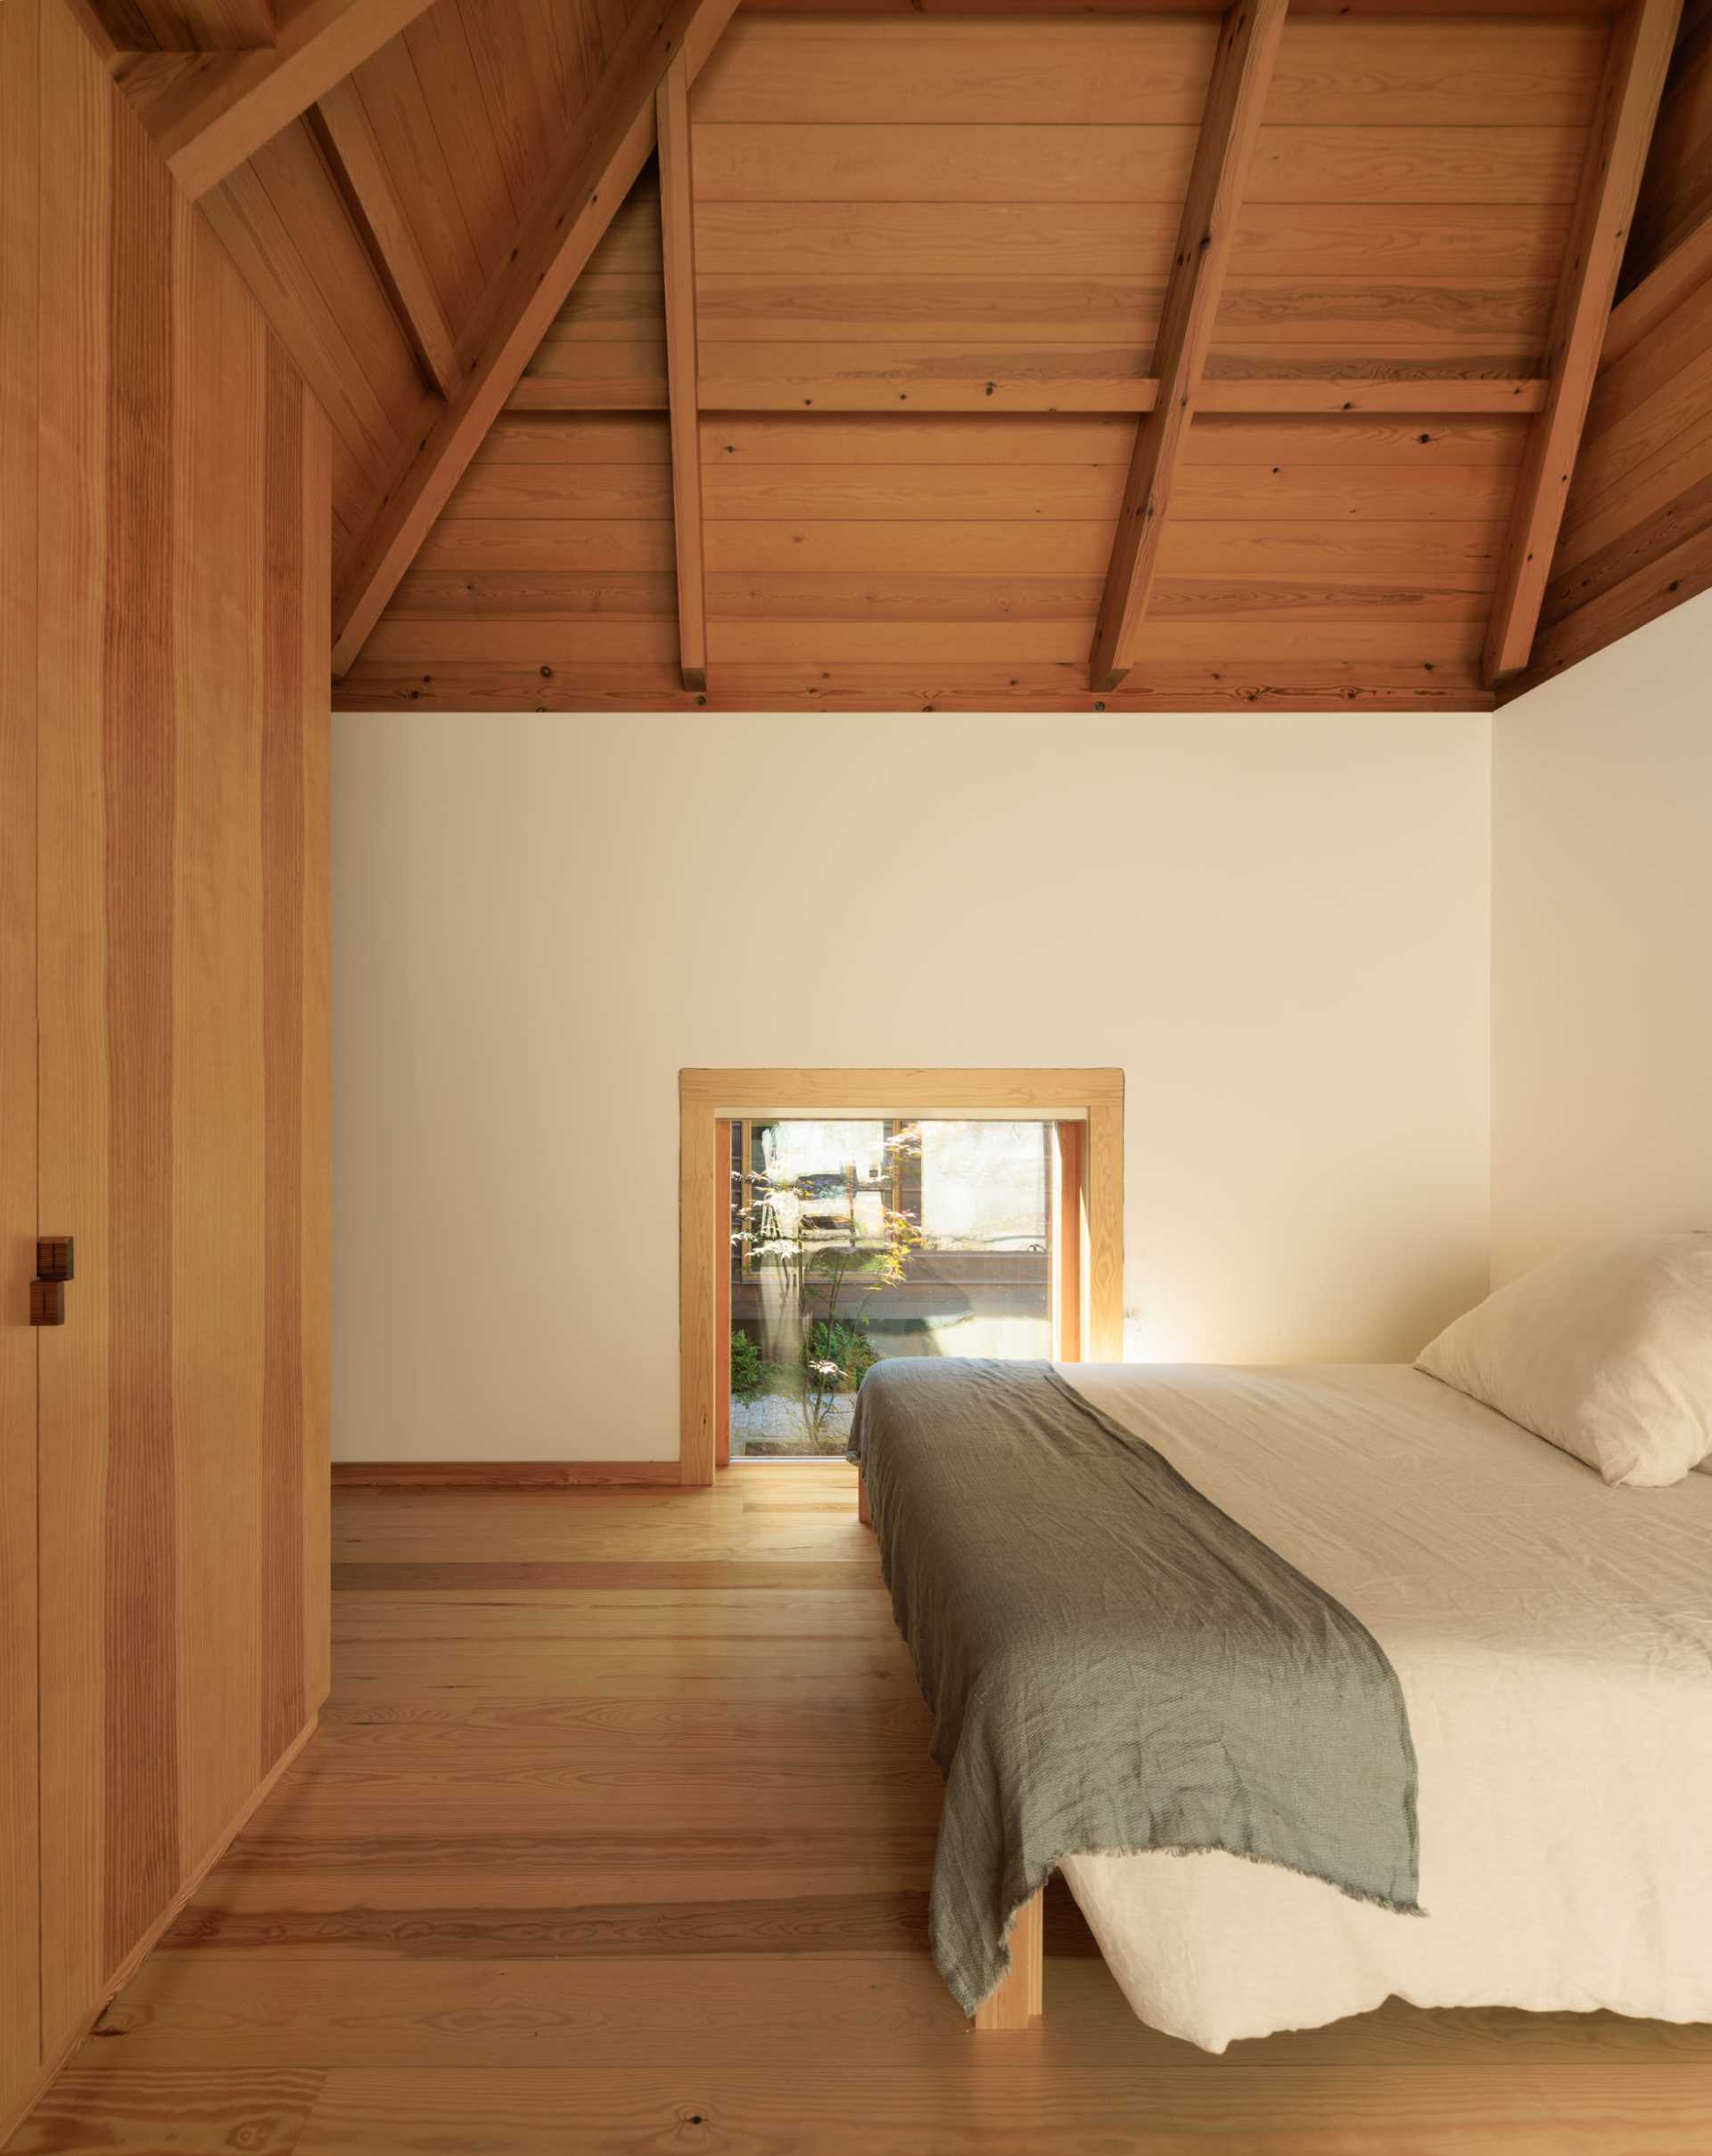 A modern and minimalist bedroom with a low window and high wood ceiling.